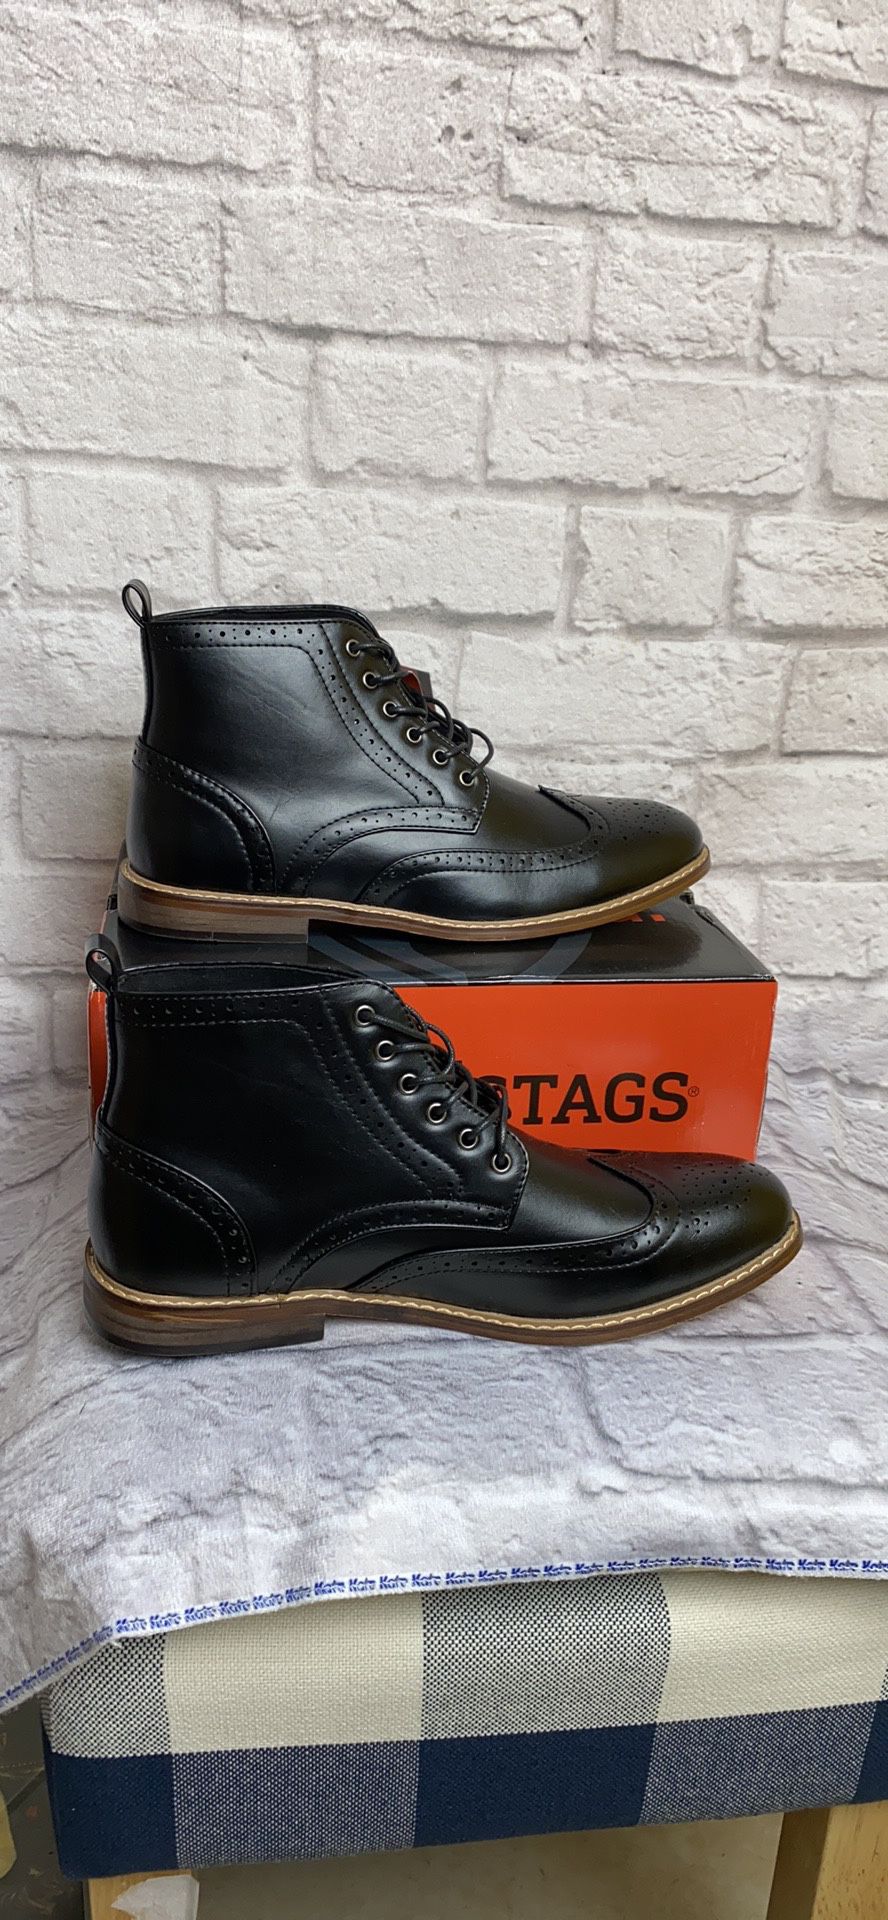 Dear Stags Jerad Black Vega Leather Boots Lace up Sz10 Mens New